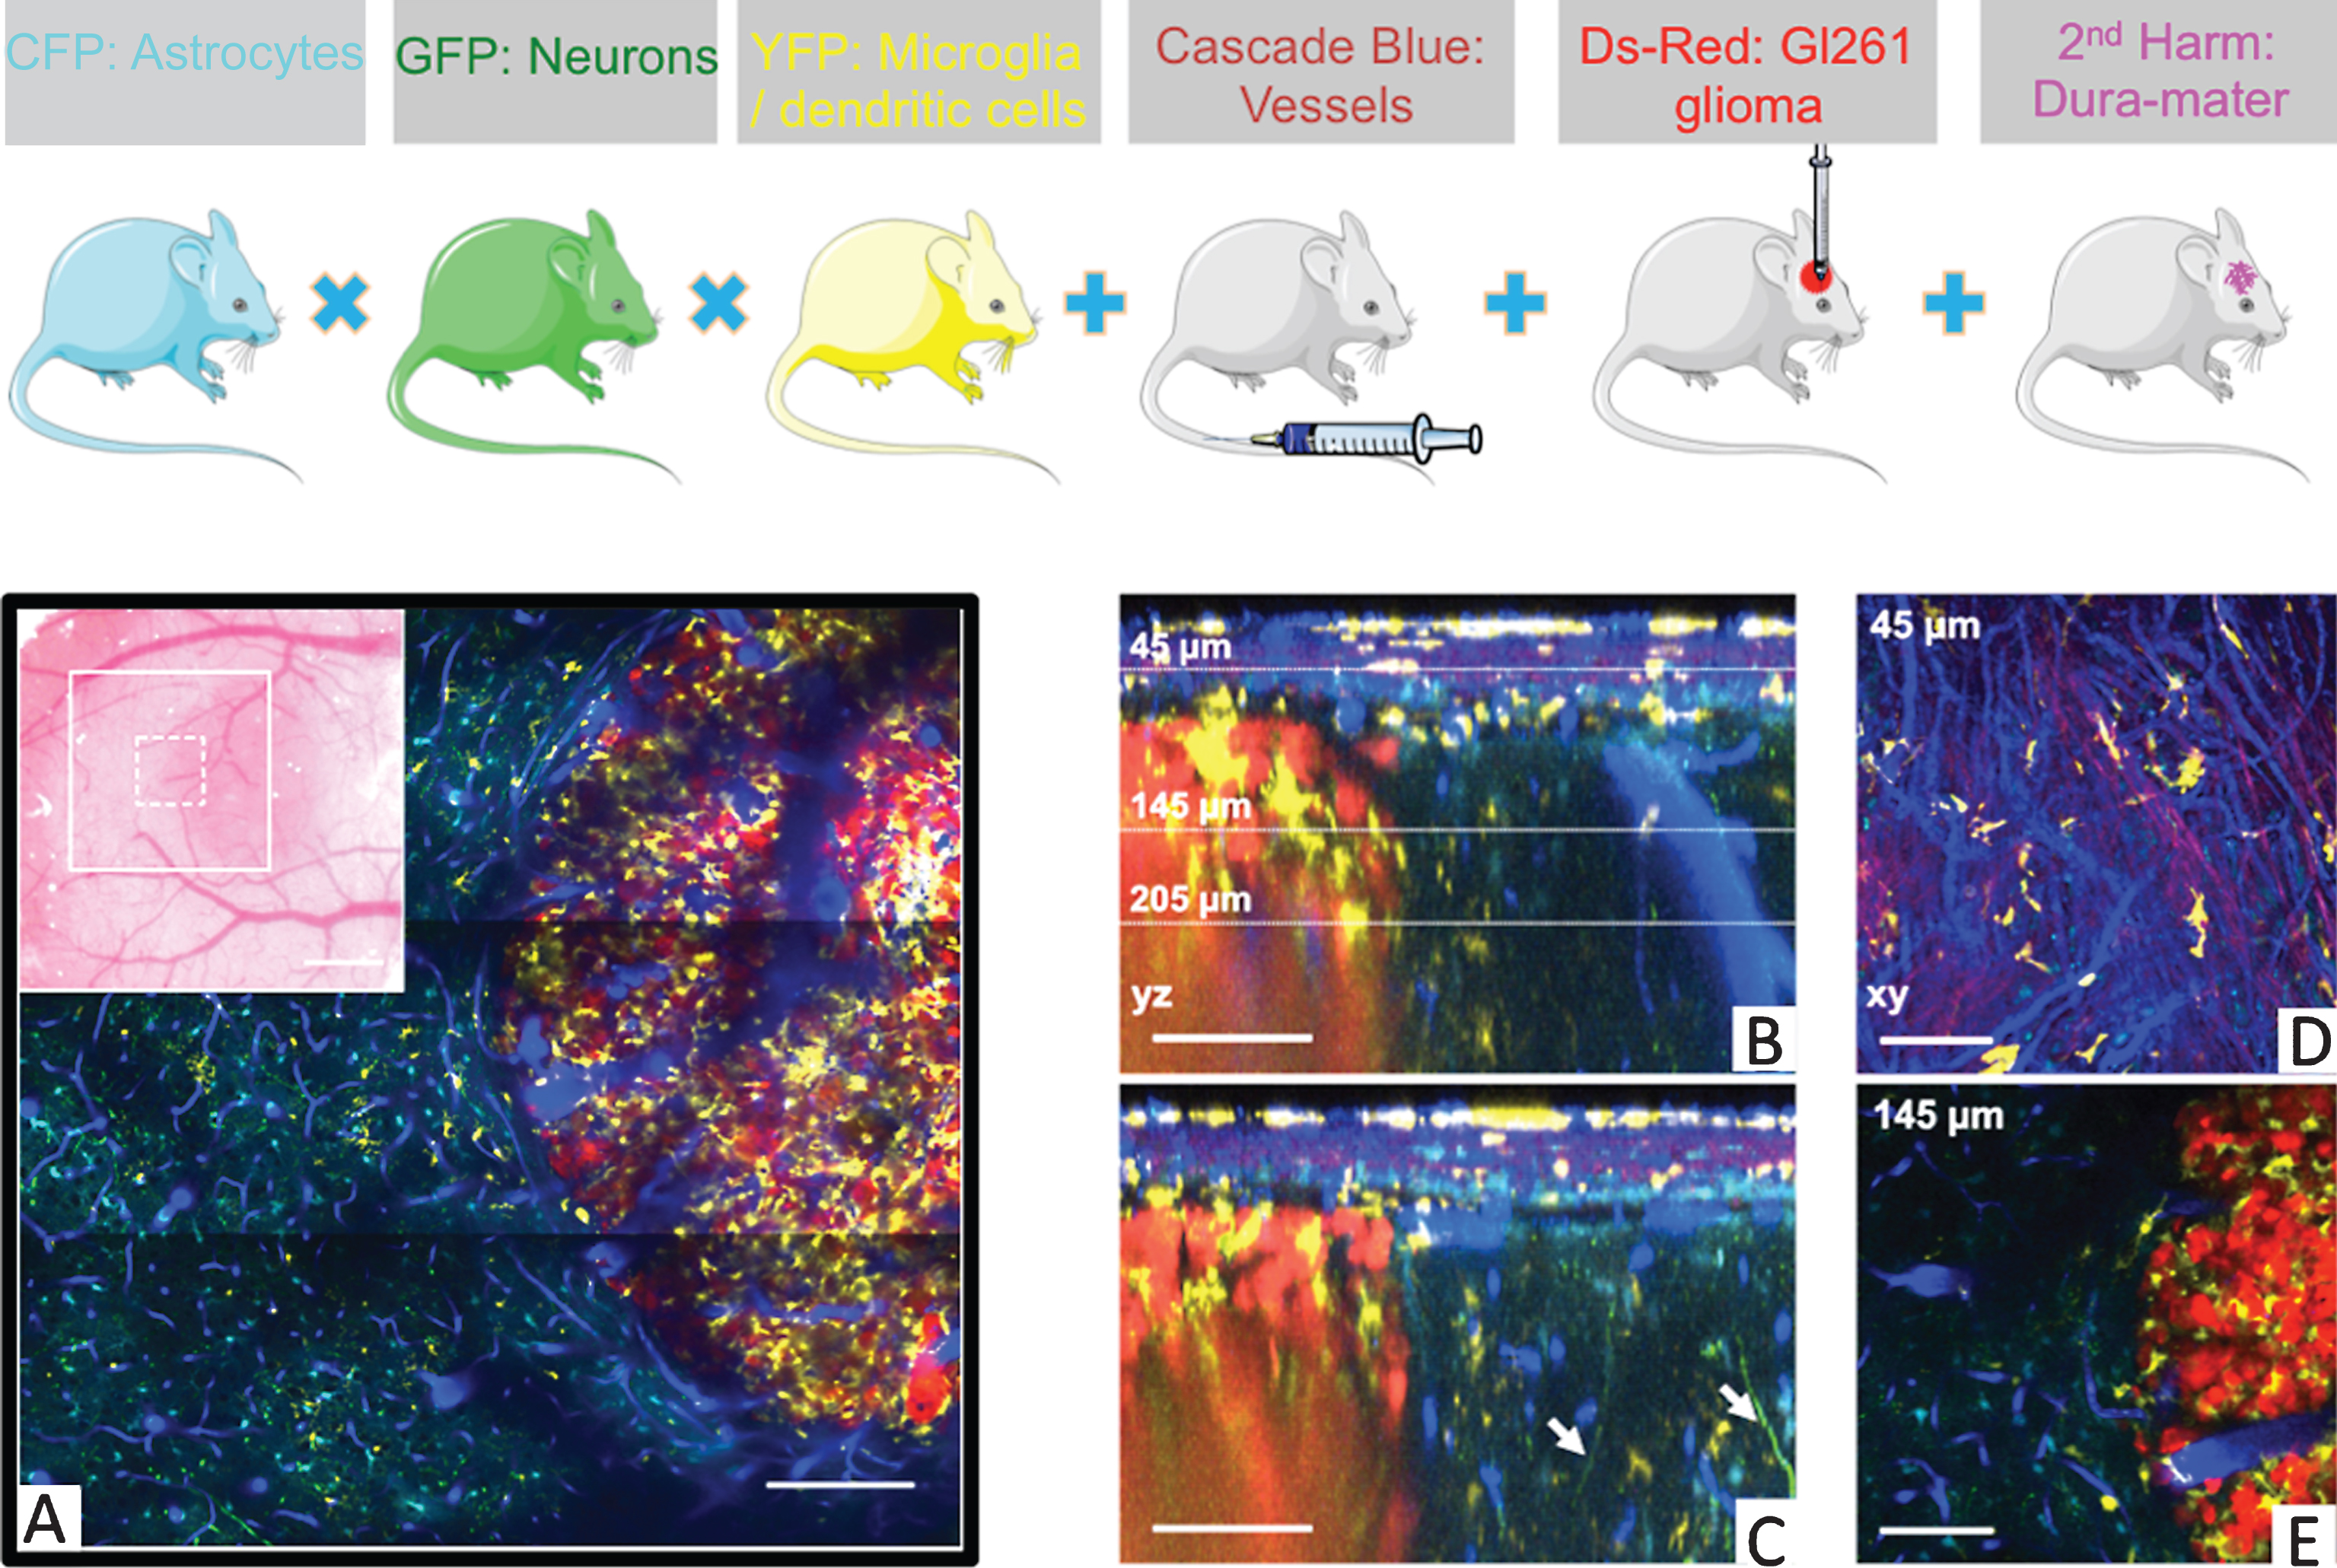 Five-color intravital two-photon imaging of glioblastoma tumor and its dynamic environment. Upper panel: fluorescent mice. (A) 5-colors tile scan (3 × 3 images) of the GBM and its microenvironment; inset: macroscopic image of the cranial window with the area covered by the tile scan (large white square) and the area covered by a single plane acquisition (small dotted square). (B) Orthogonal reconstructions obtained from a stack acquired from 0 to 300 μm below the glass coverslip with a z-step of 3 μm. Each YZ image shows the maximum intensity projection over 10 microns along the X axis. (Note in B the vertical orientation of major brain vessels; dotted lines: the levels of xy-sections. (C) Apical dendrites GFP positive of neurons are visible (arrows). Also note the SHG signal (magenta) corresponding to the collagen fibers at the level of the dura-mater. CD11c-positive cells (yellow) have invaded the tumor but not surrounding healthy tissues. (D, E) xy-sections taken at 45 μm and 145 μm below the glass coverslip. Colors: blue: vasculature, cyan: astrocytes, green: neurons, yellow: CD11c-positive cells, magenta: SHG signal (dura-mater), red: tumor cells. Scale bars: 100 μm (adapted from Ref.18).